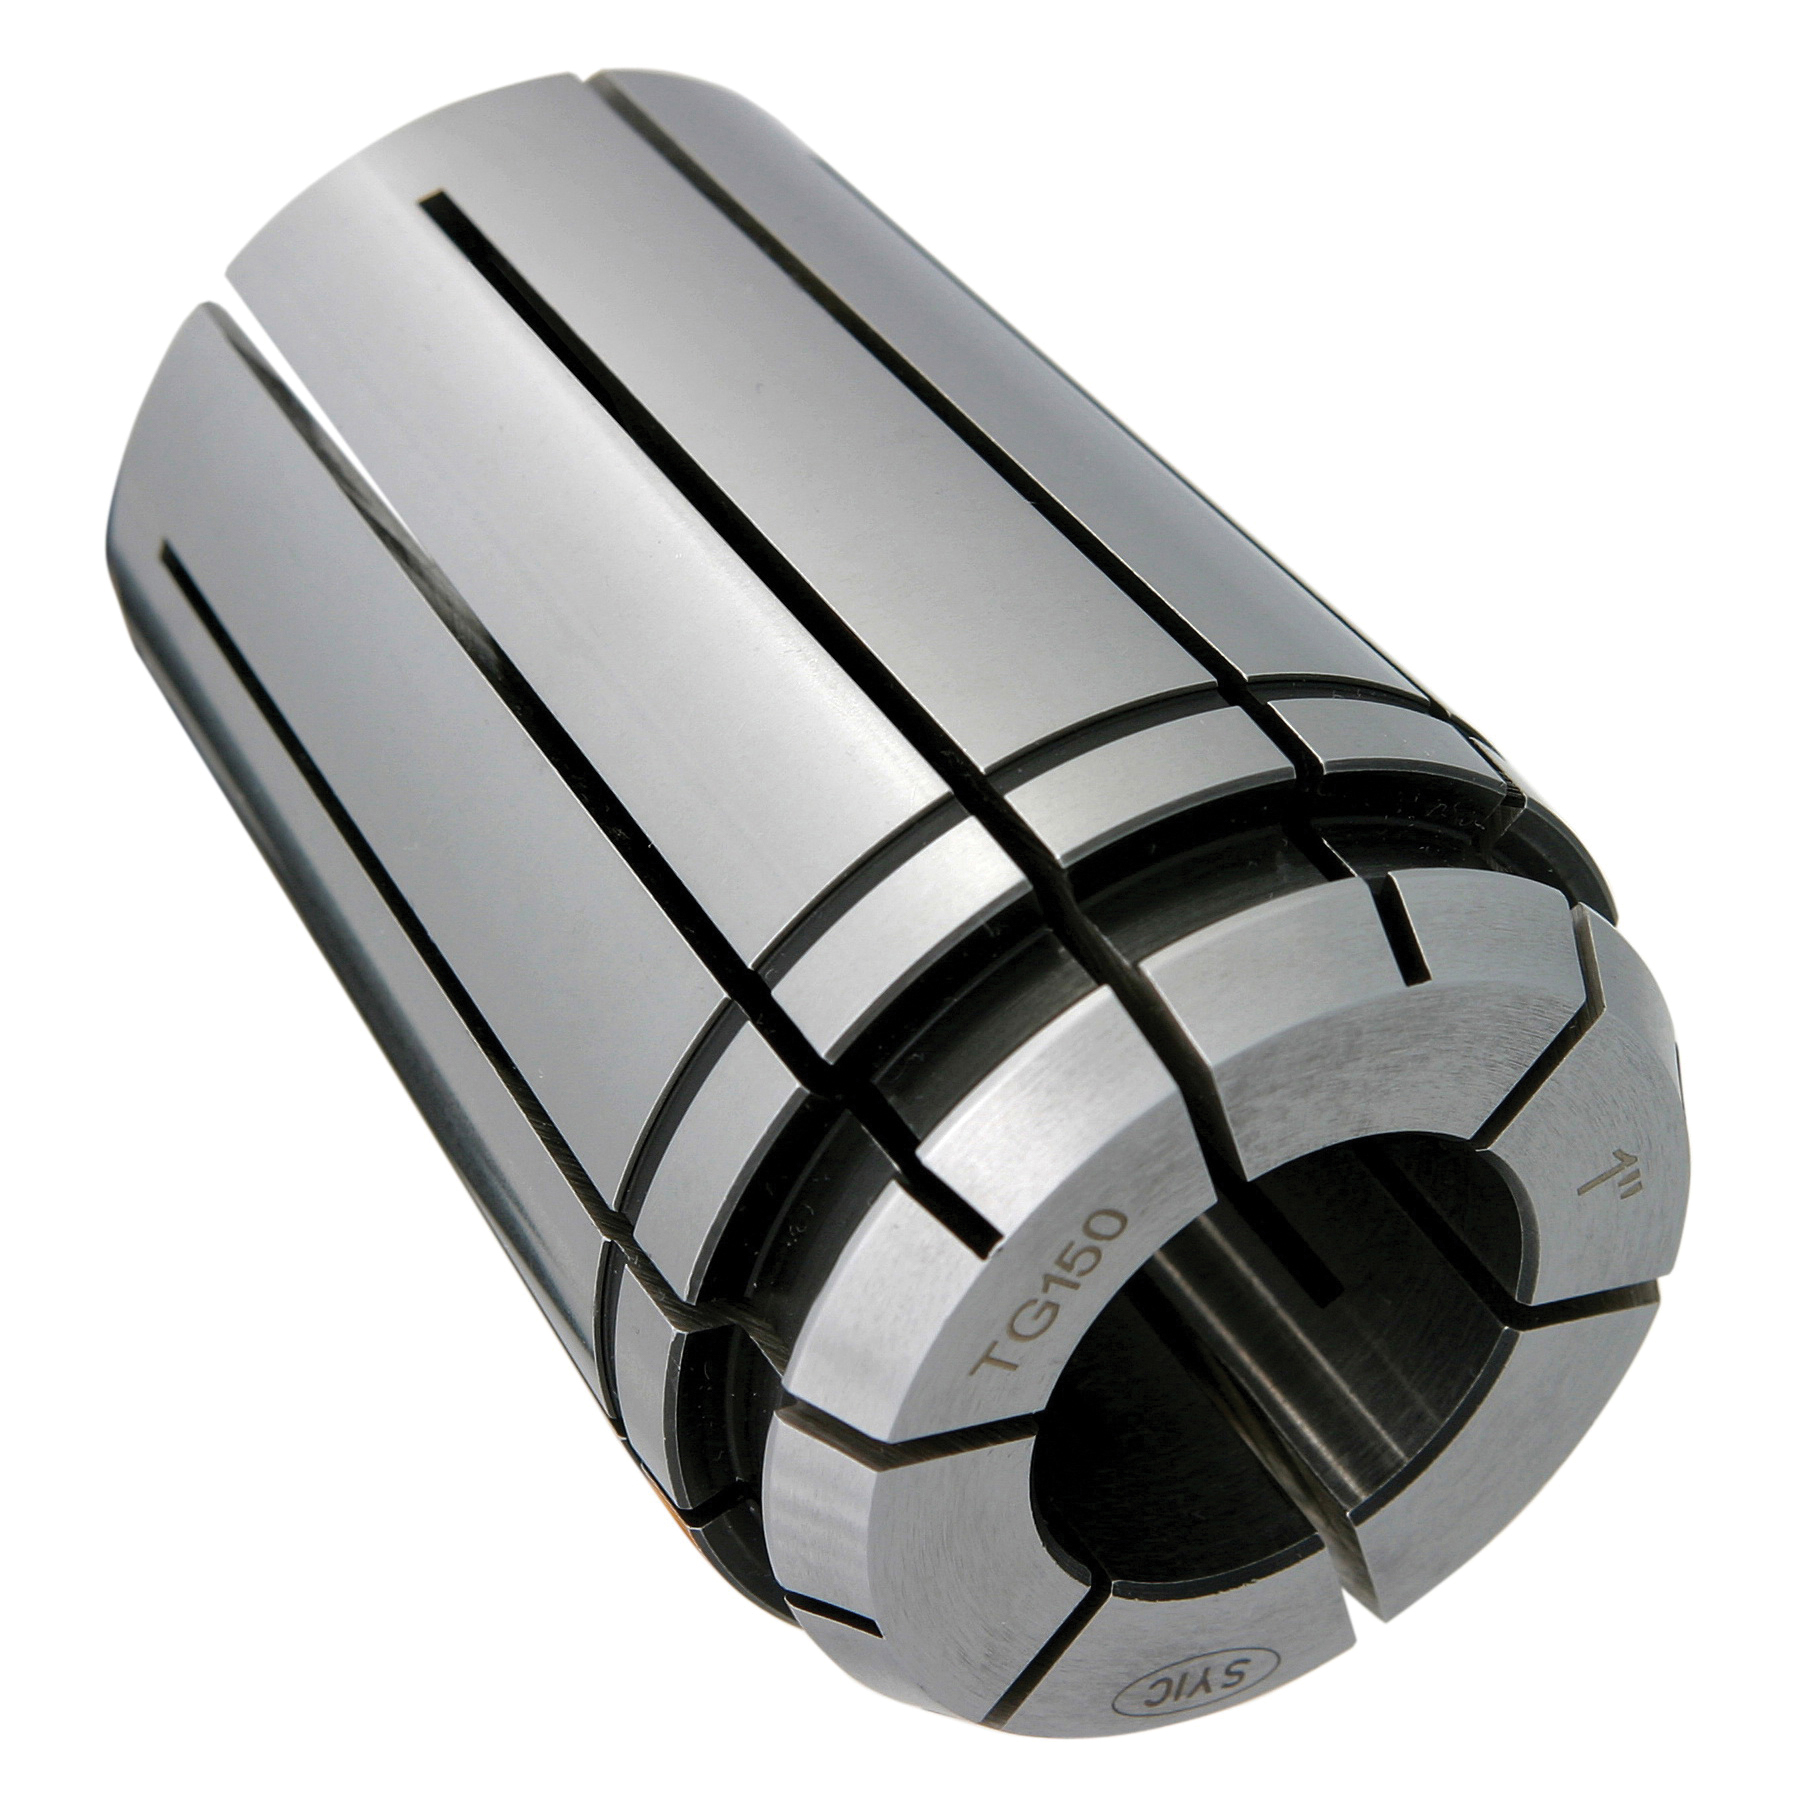 TG150 1-7/64" COLLET